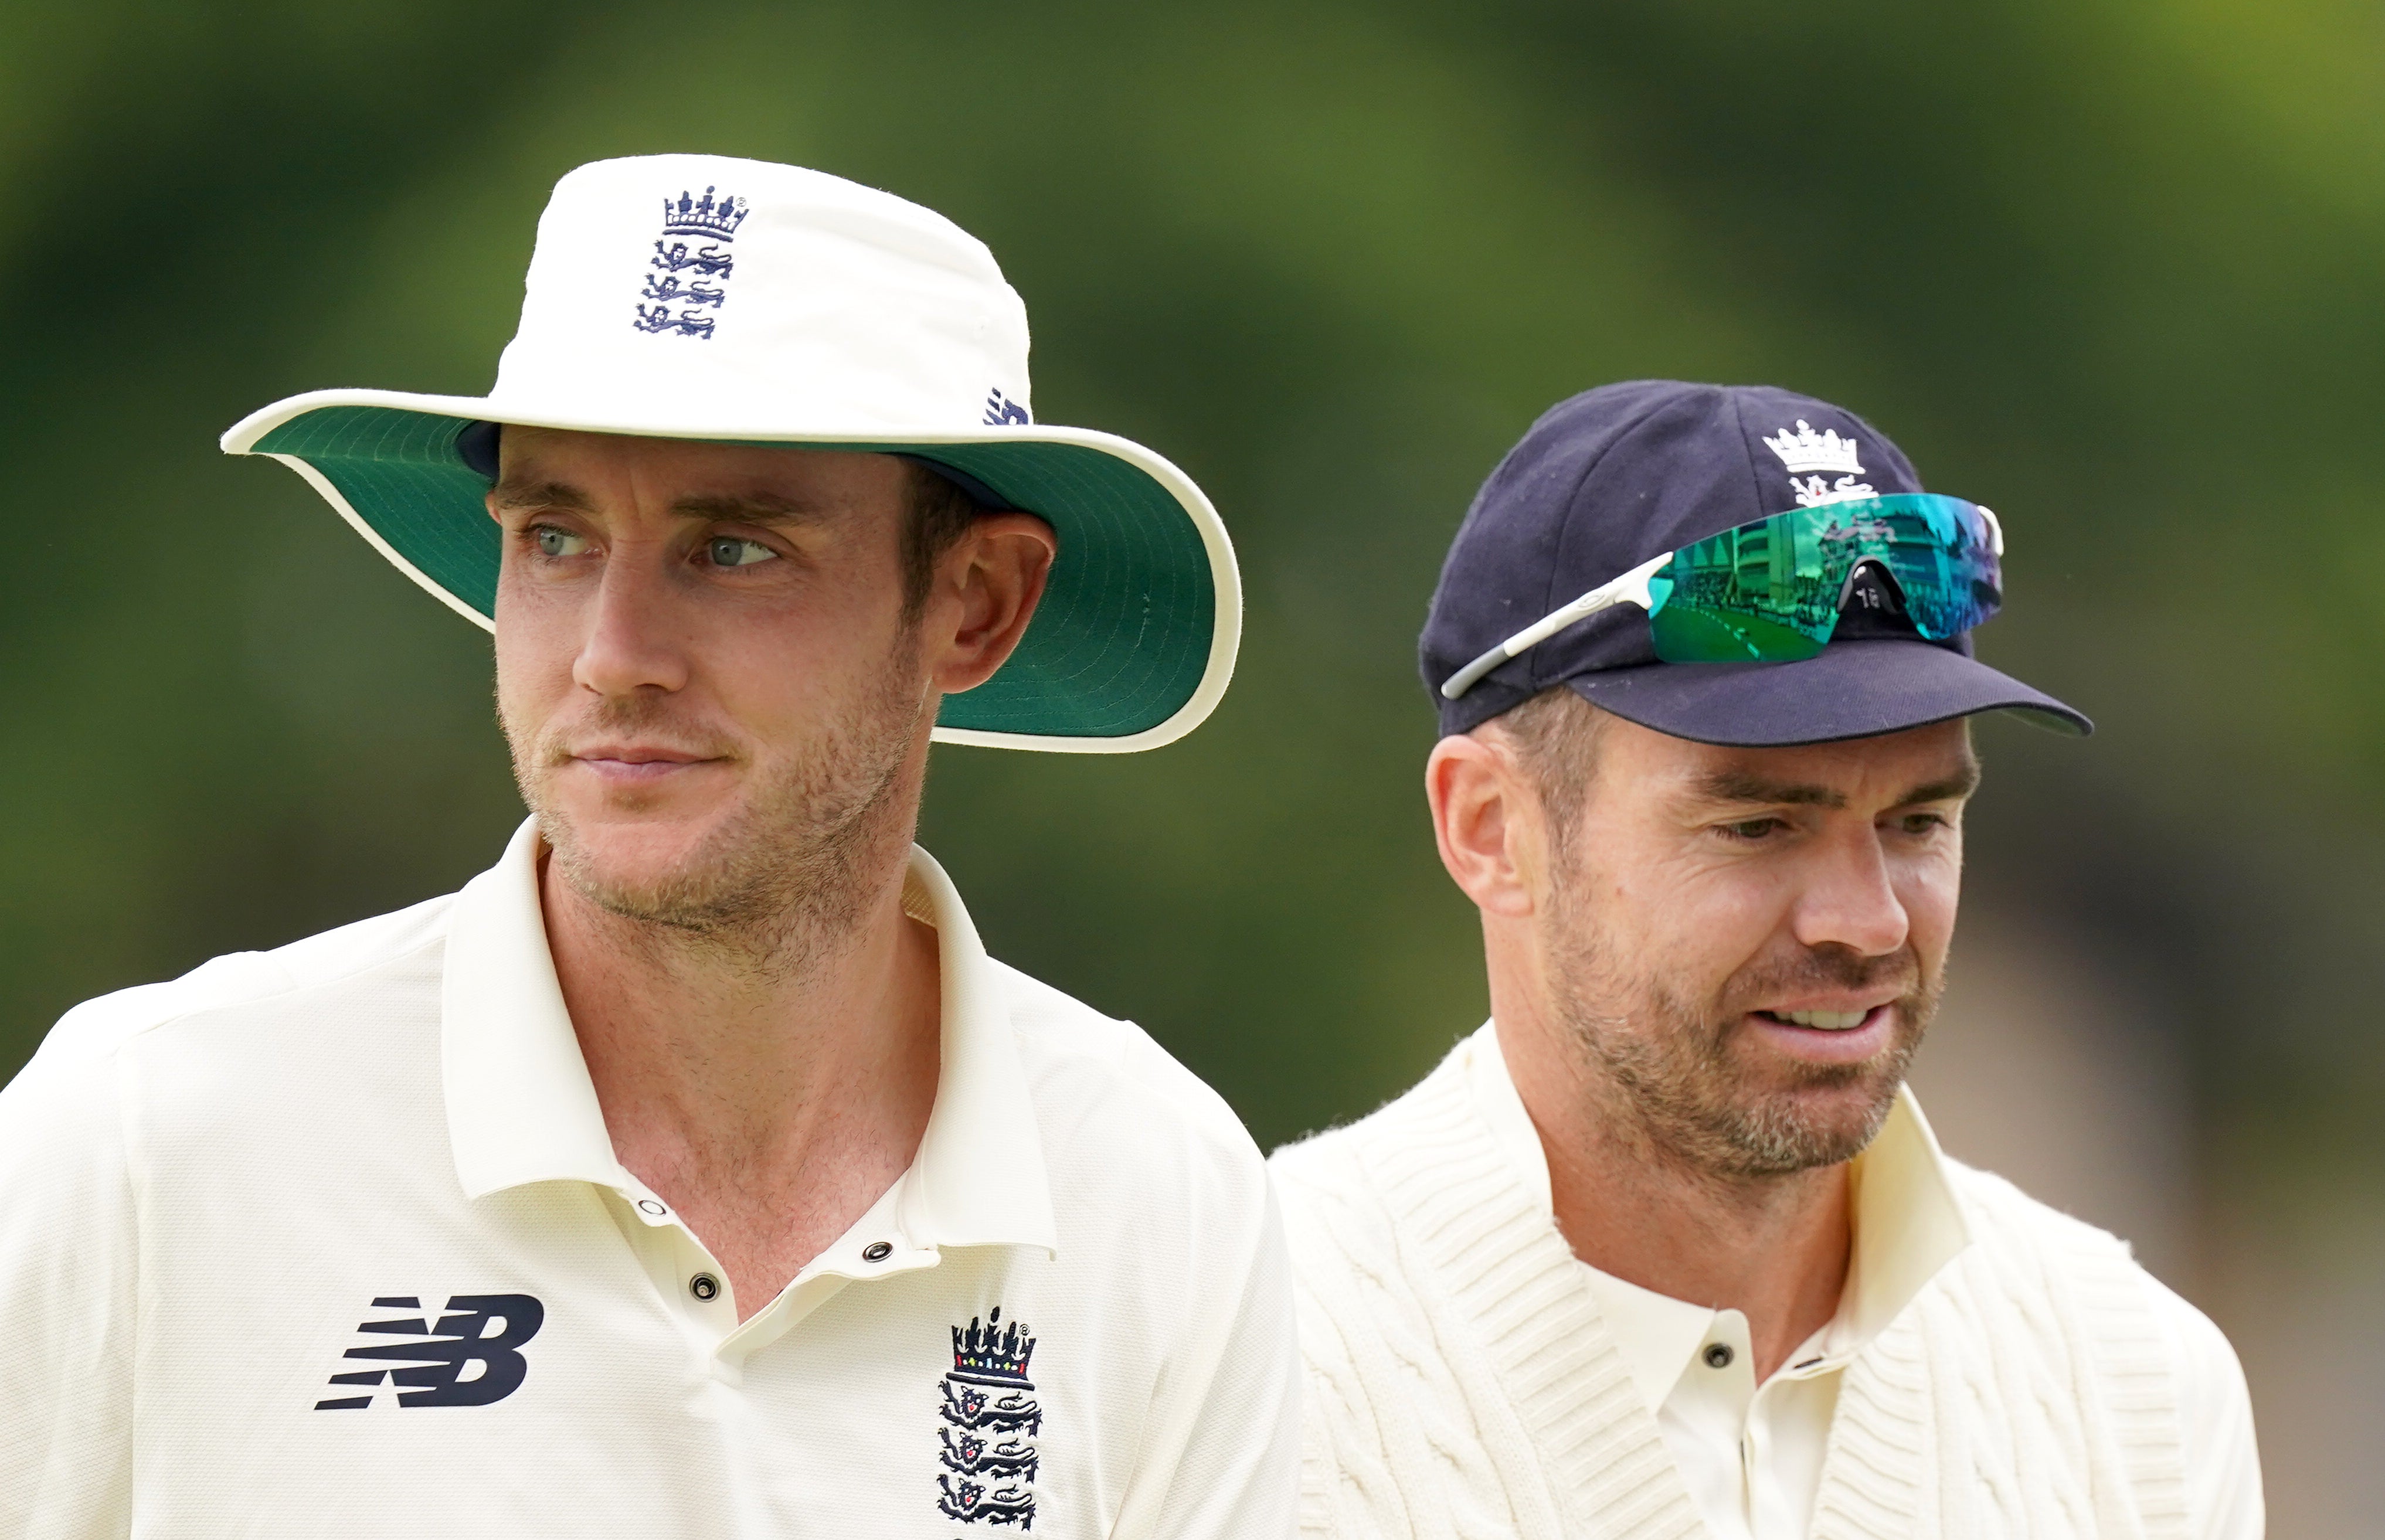 James Anderson, right, and Stuart Broad are set to appear for Lancashire and Nottinghamshire respectively this week (Tim Goode/PA)